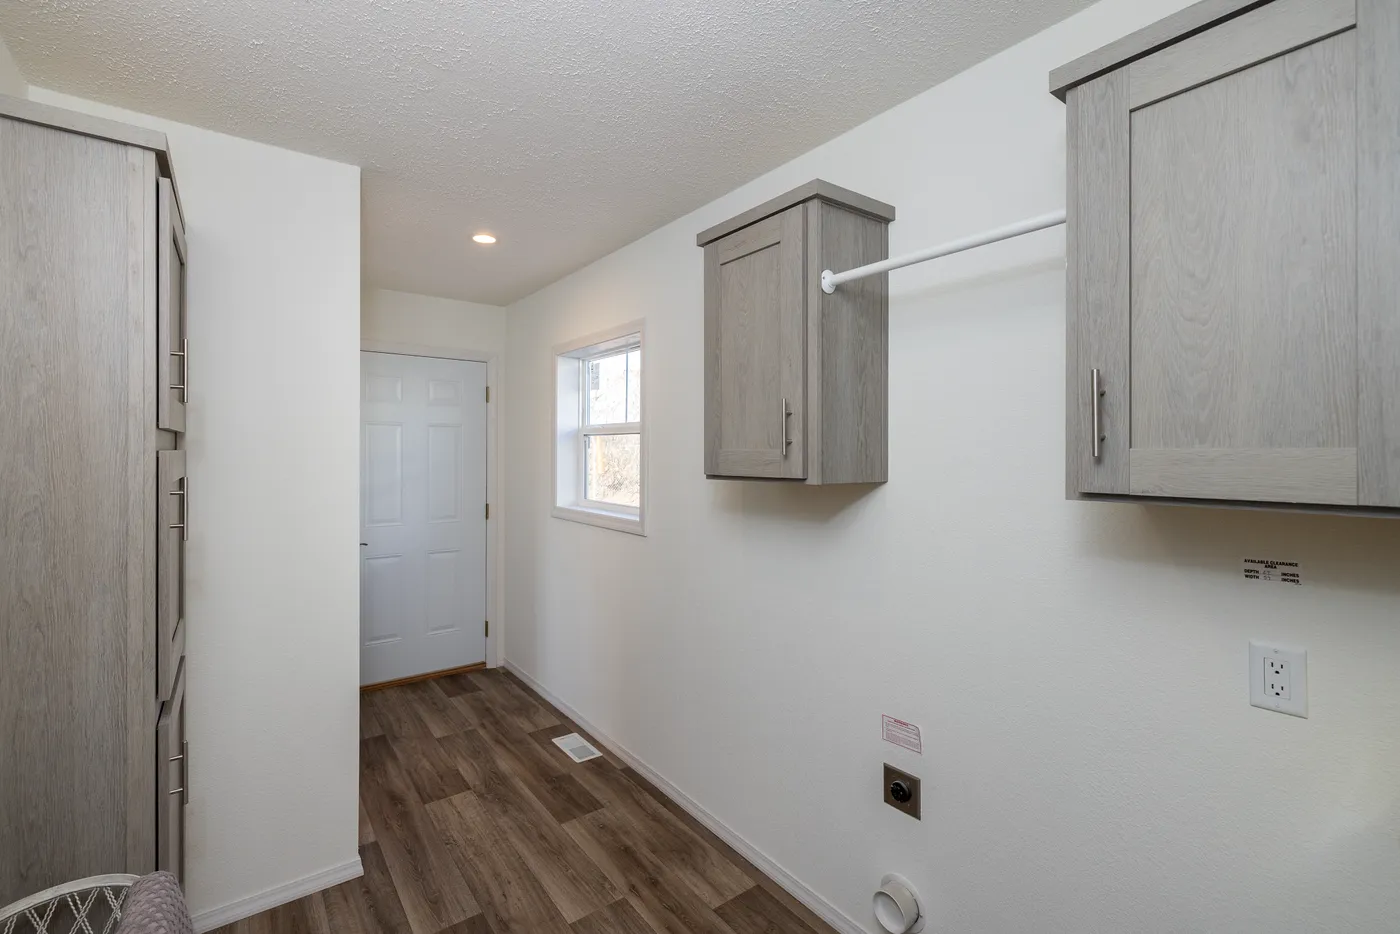 The ROOSEVELT MOD Utility Room. This Modular Home features 3 bedrooms and 2 baths.